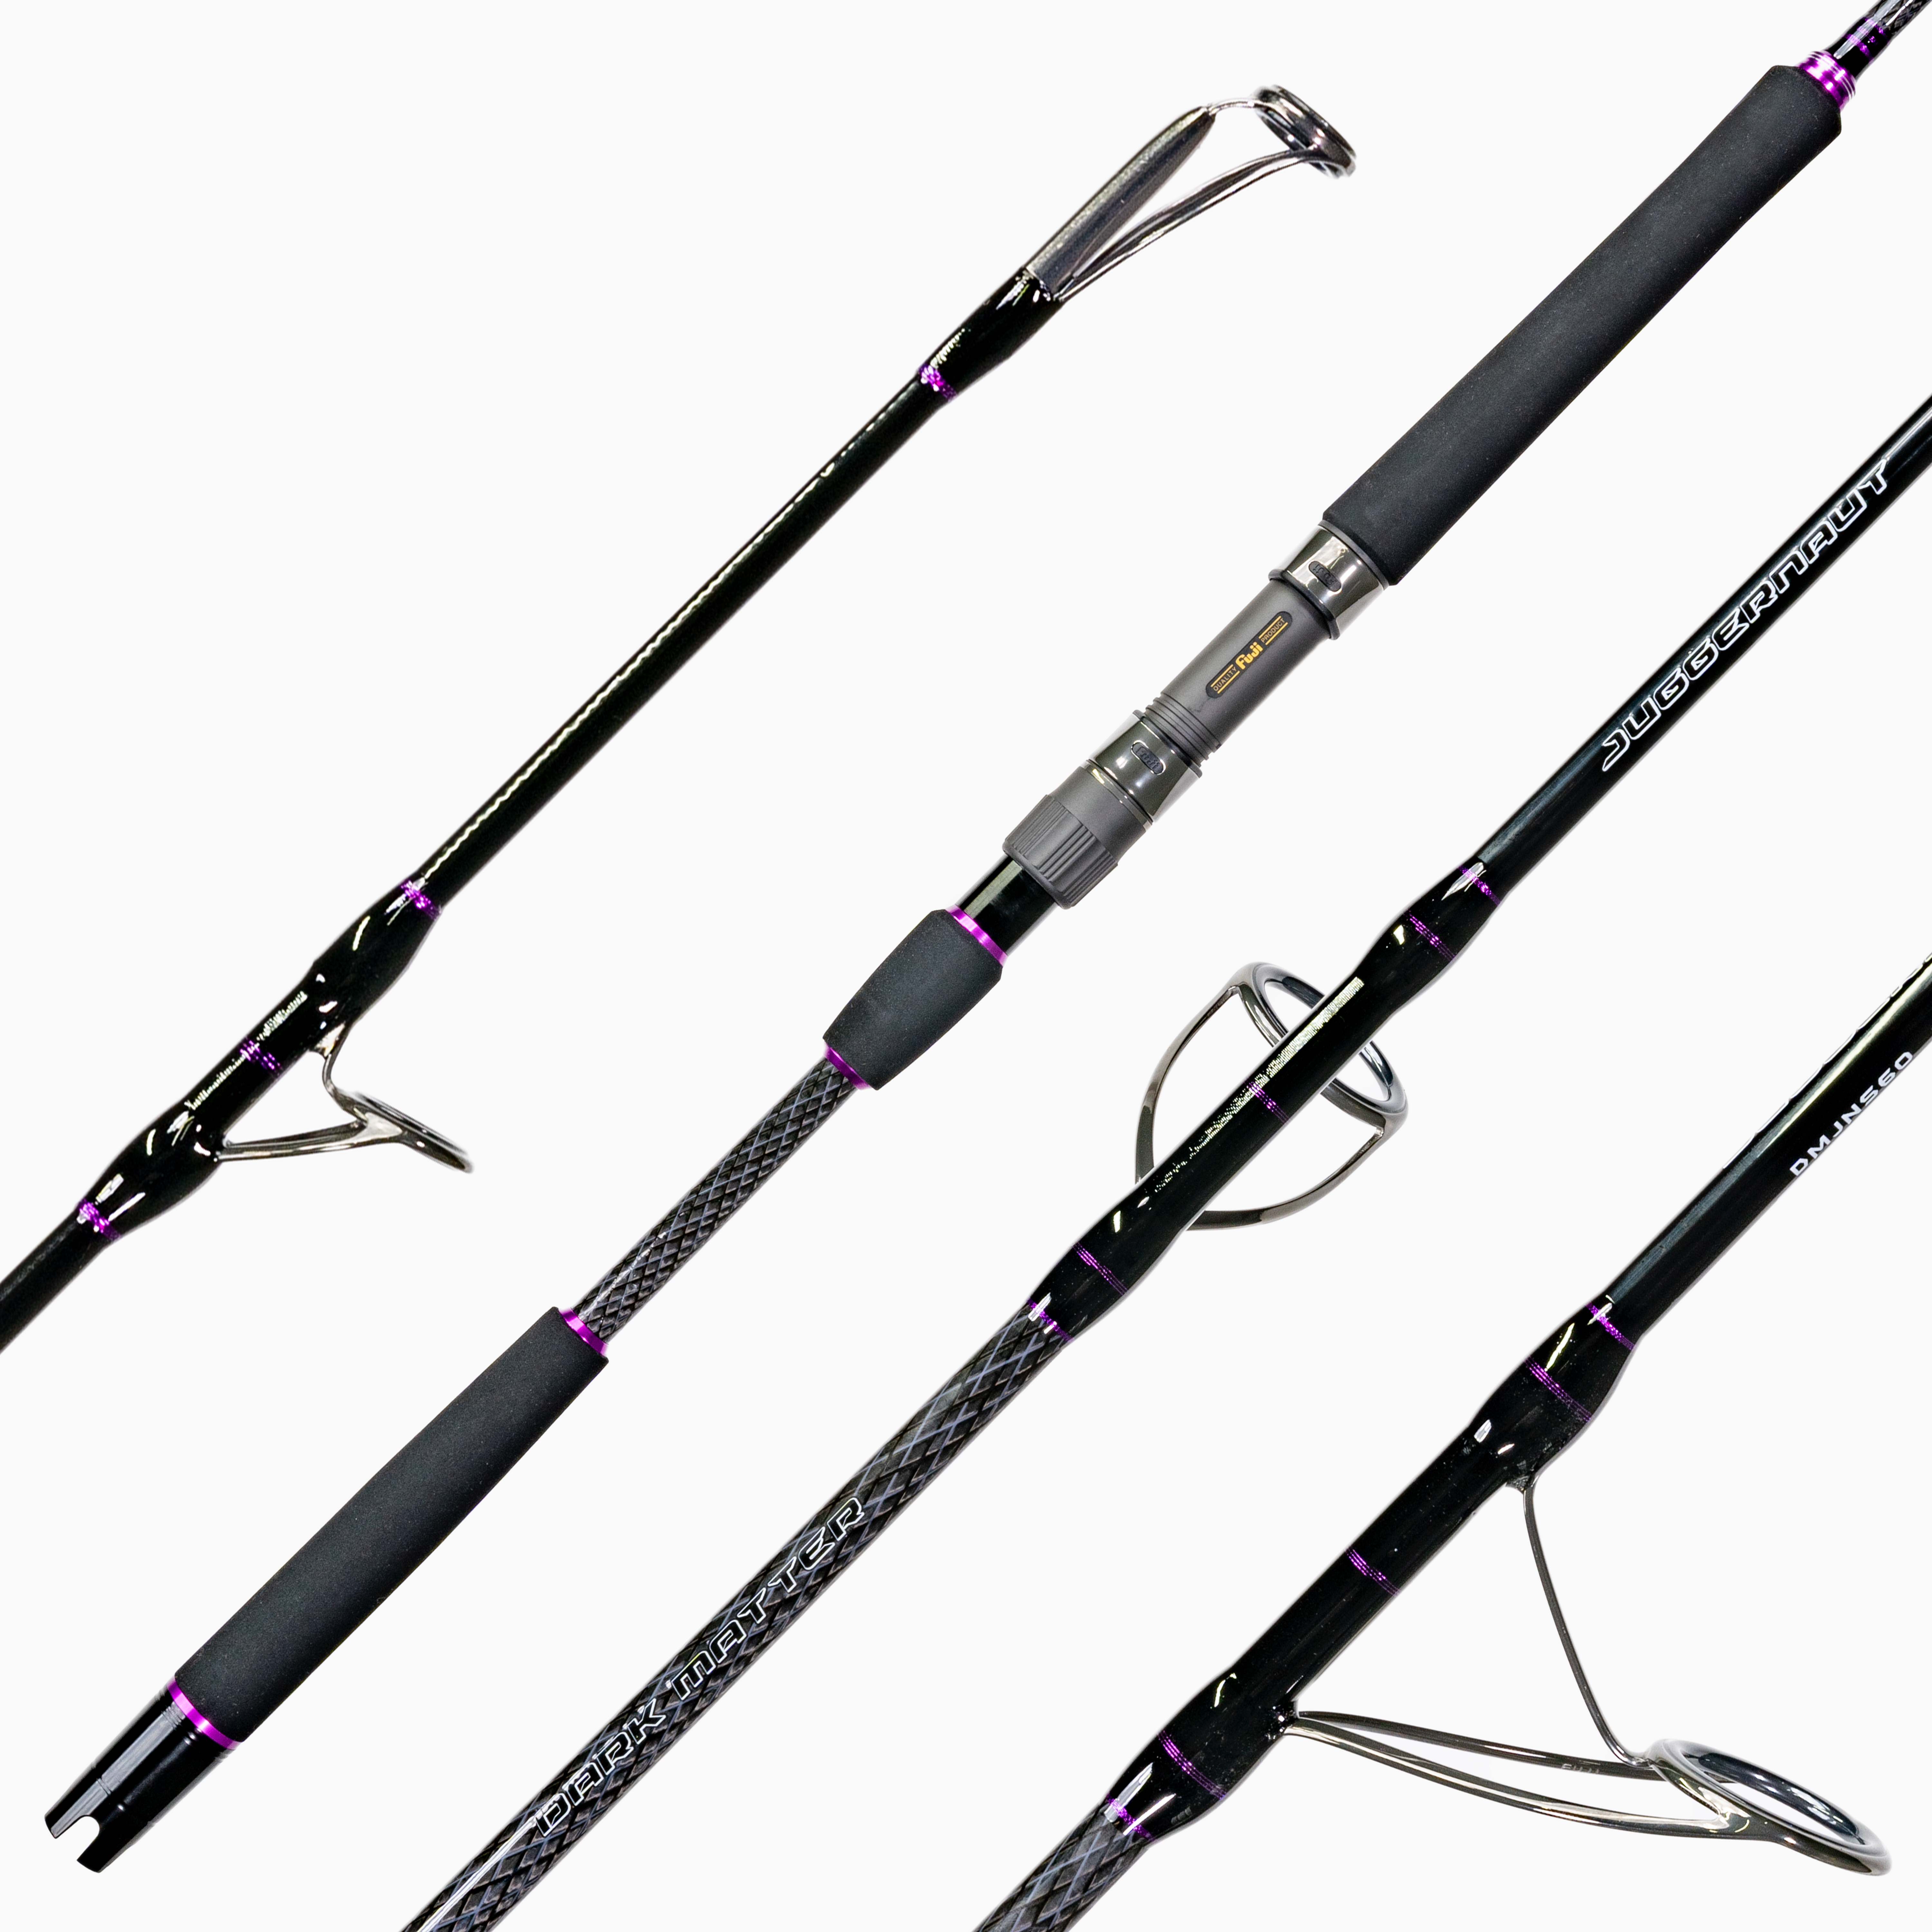 Travel Fishing Rods On Sale